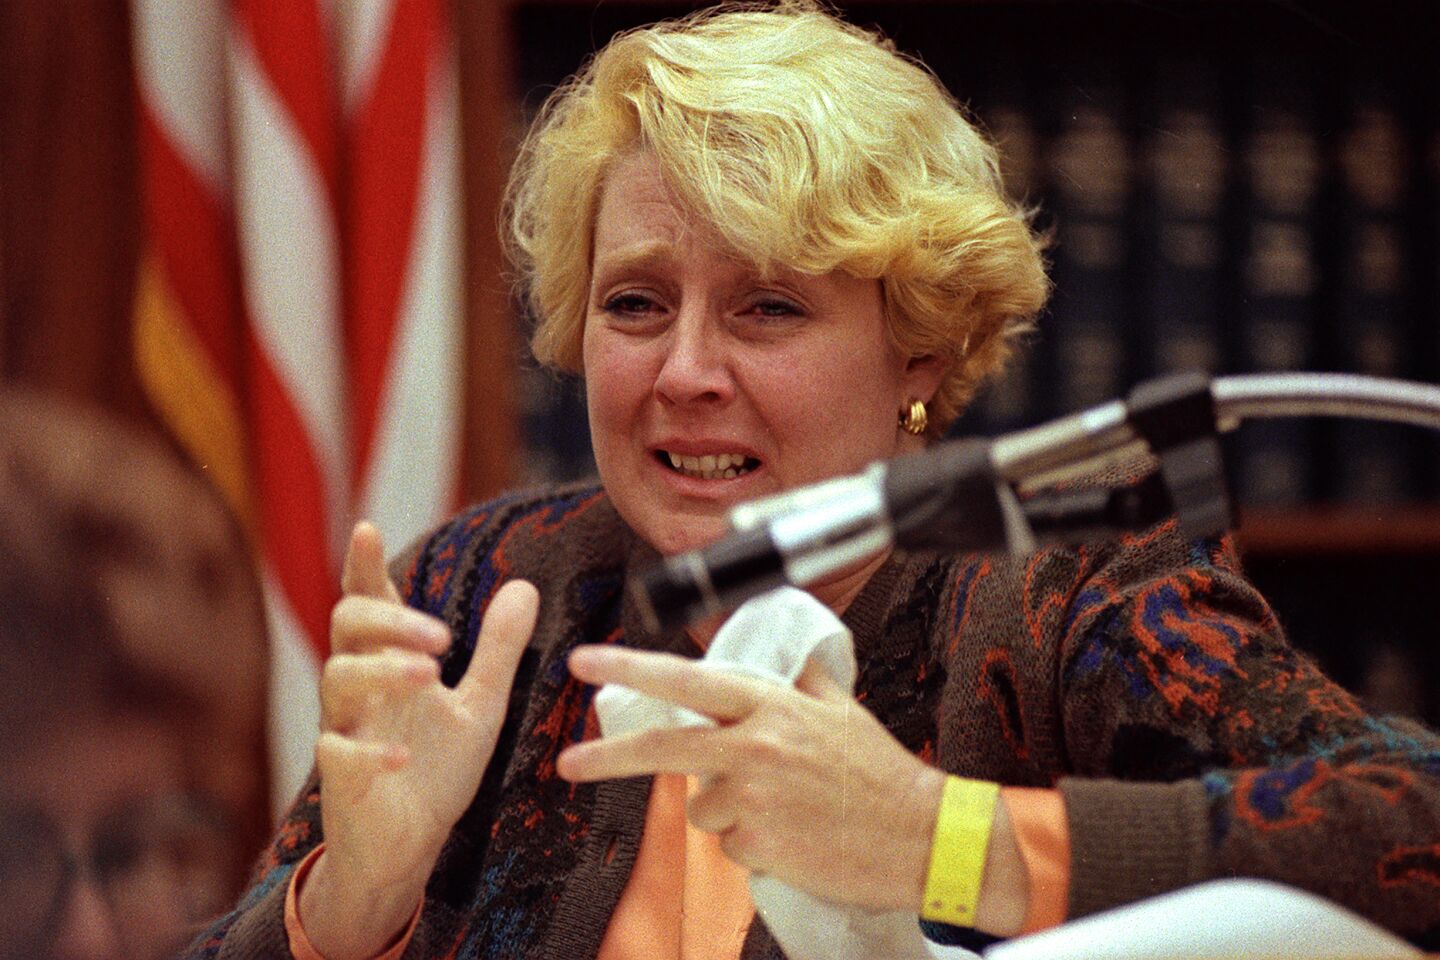 Broderick cries while testifying in her own defense Nov. 5, 1991.